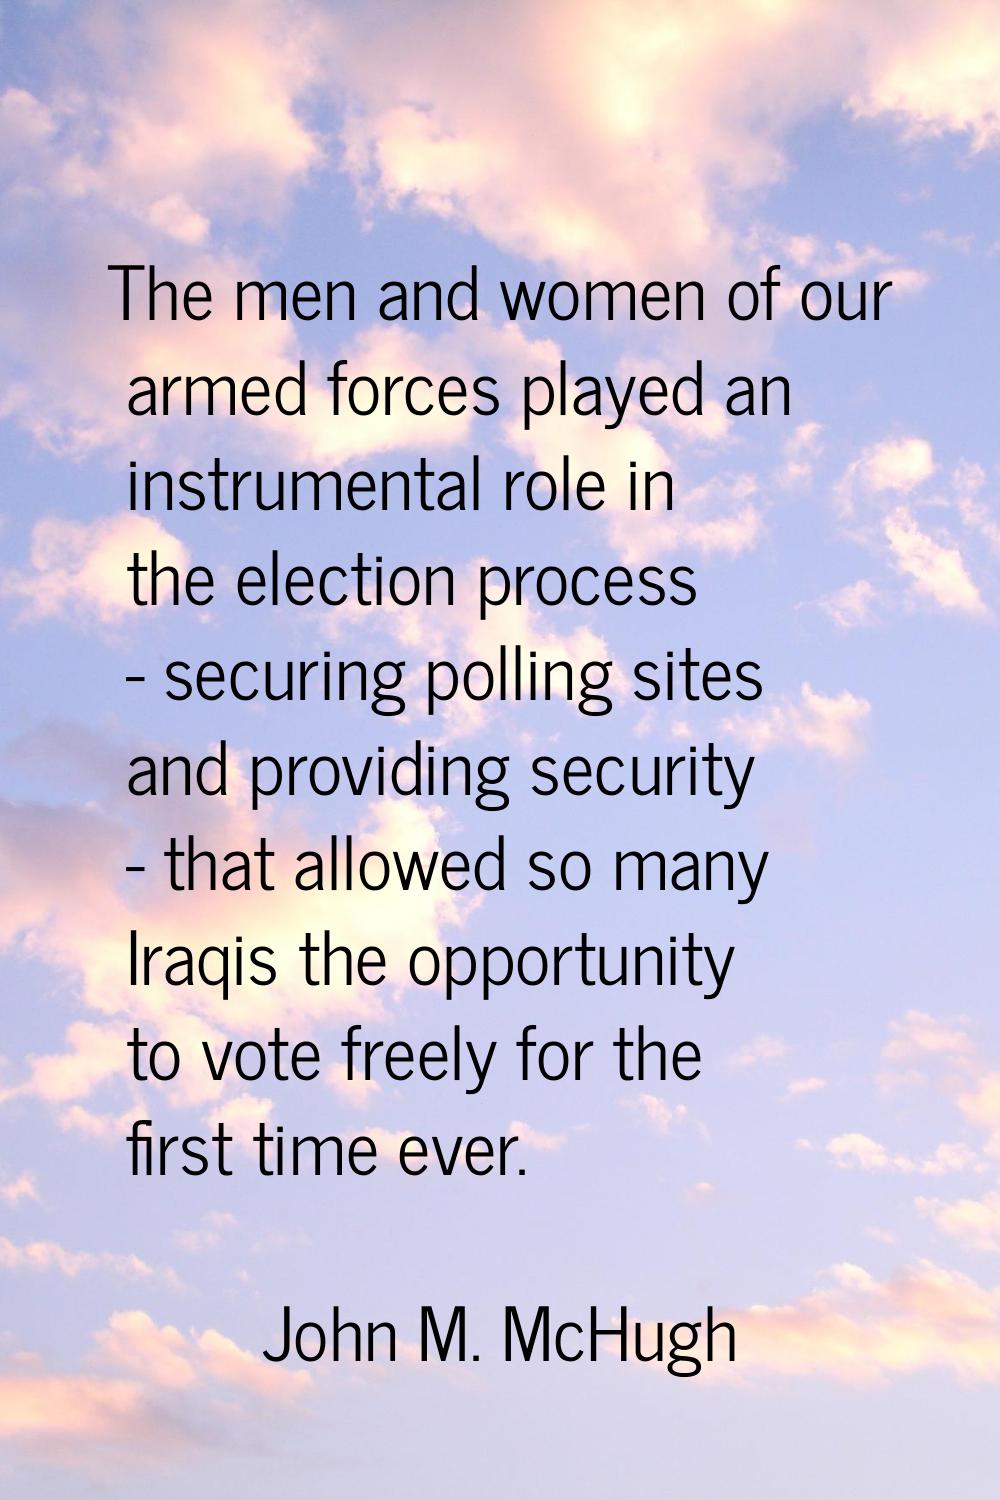 The men and women of our armed forces played an instrumental role in the election process - securin